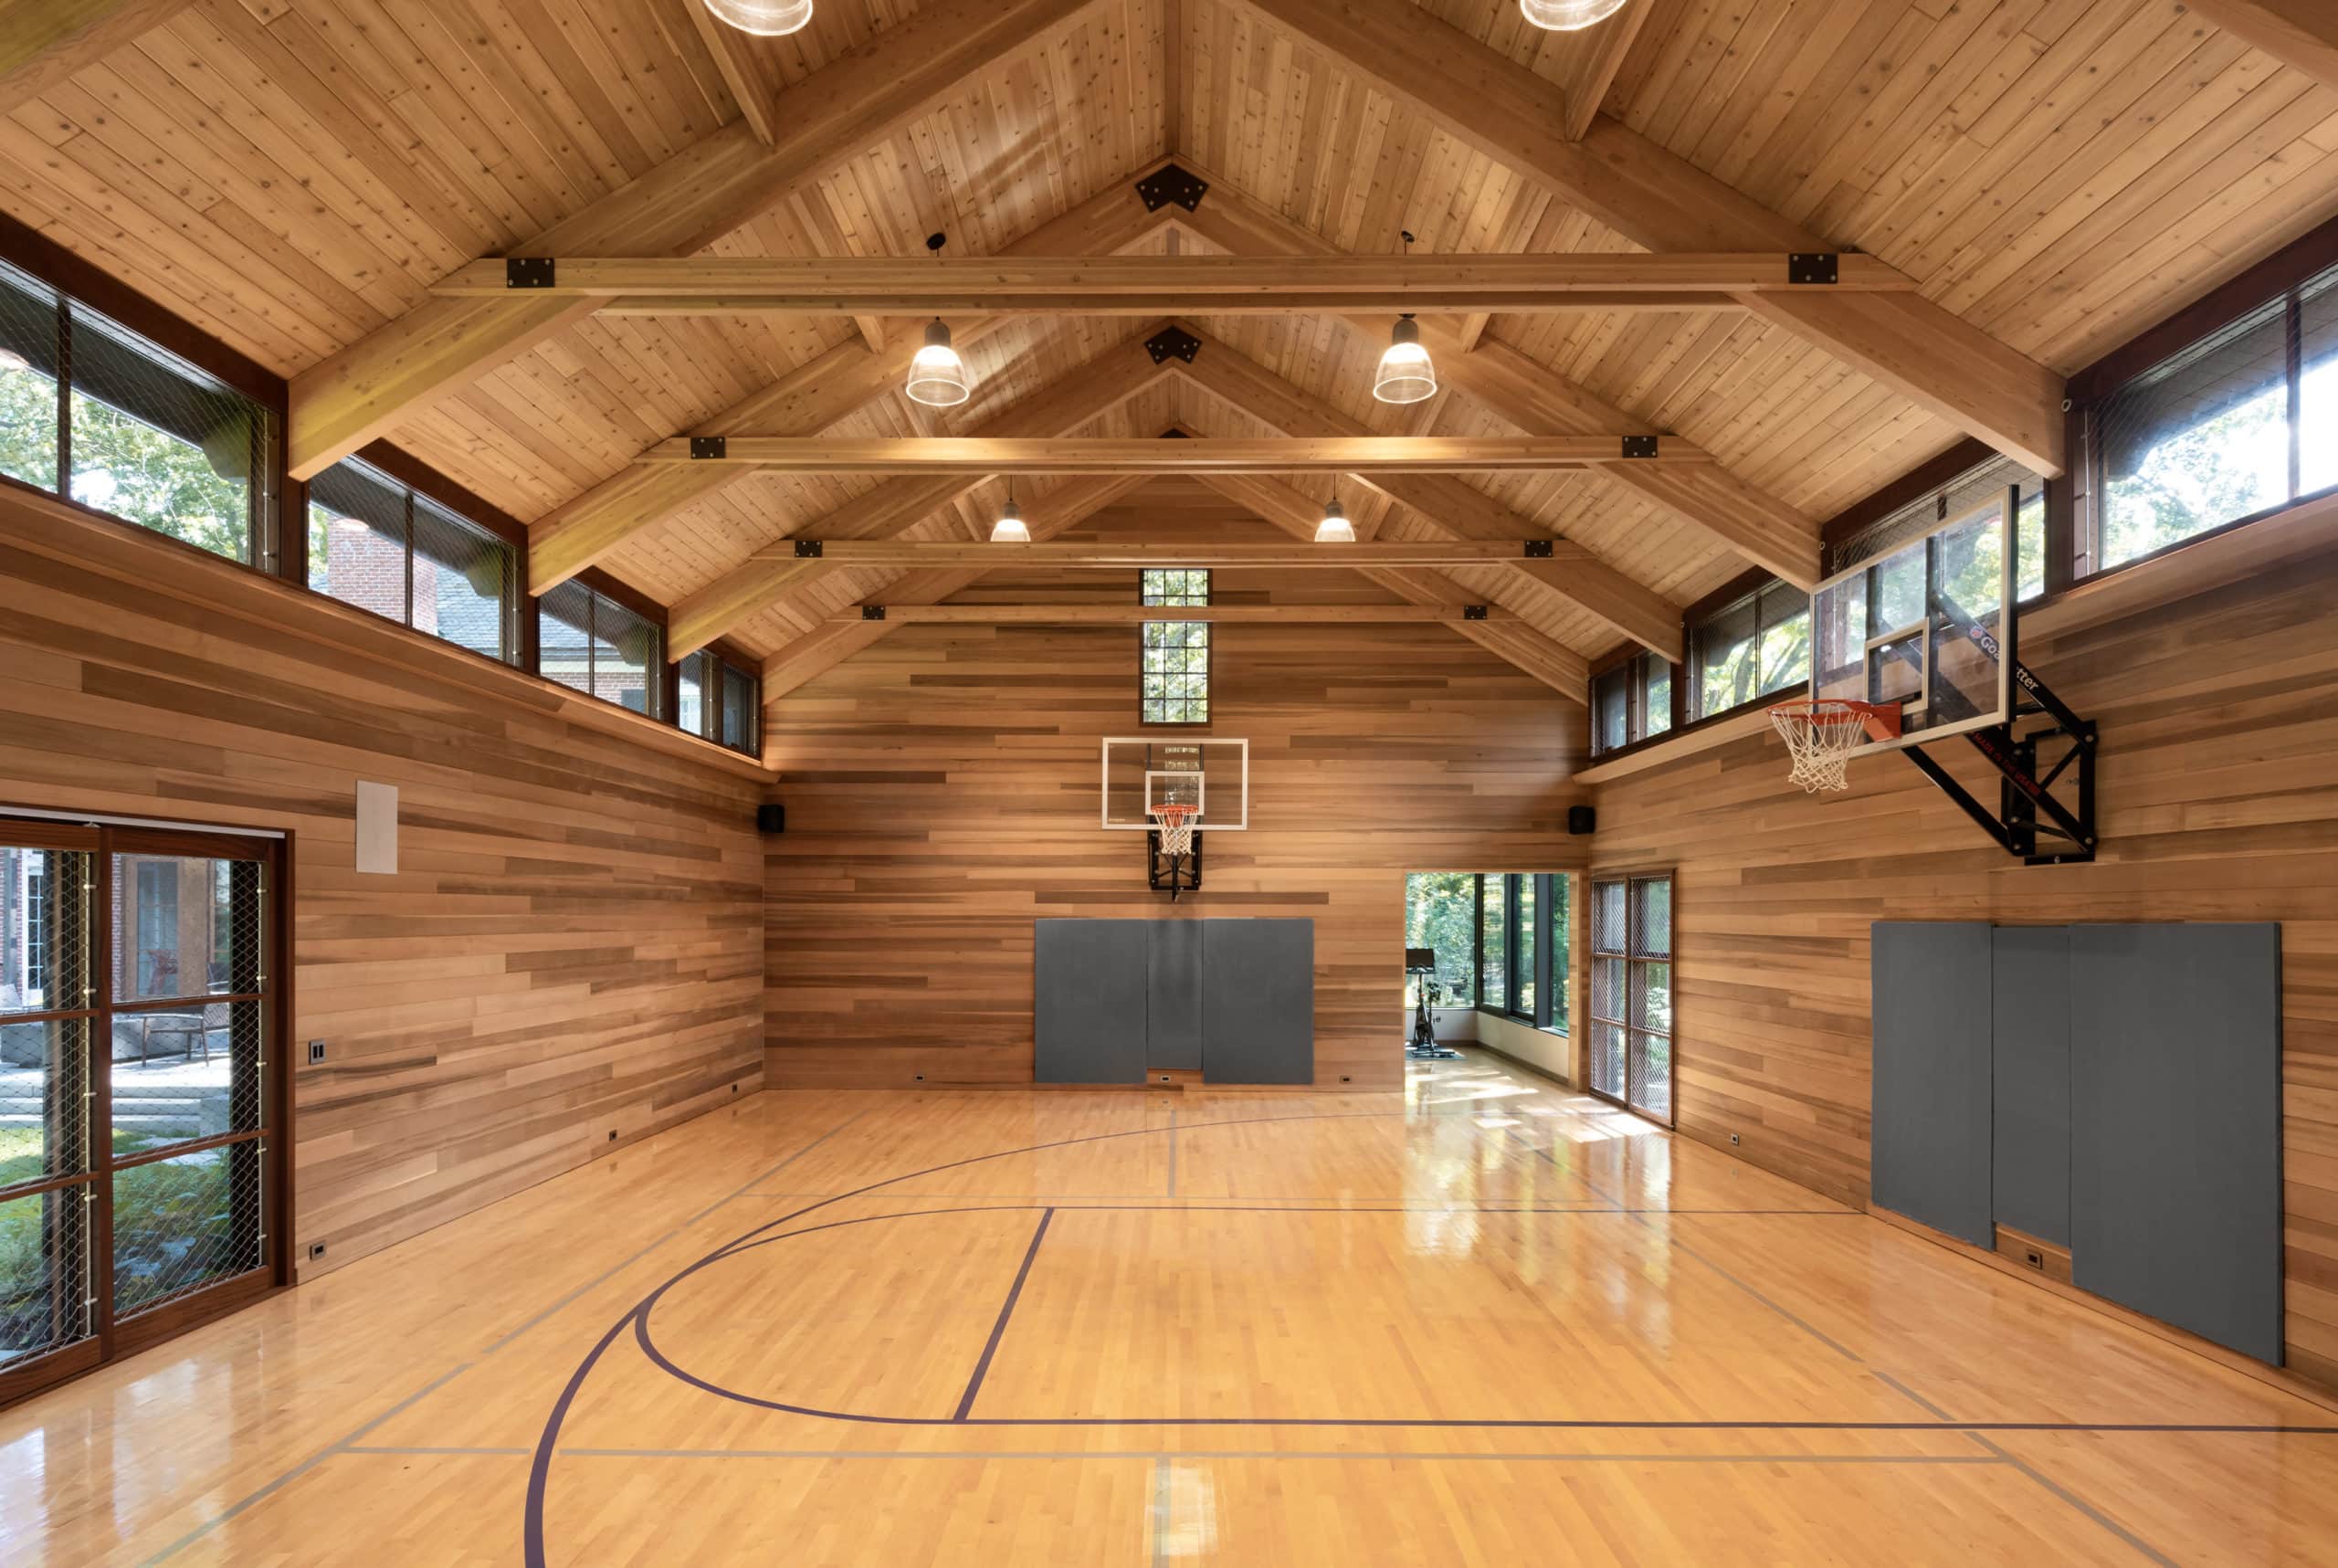 indoor basketball court in a house